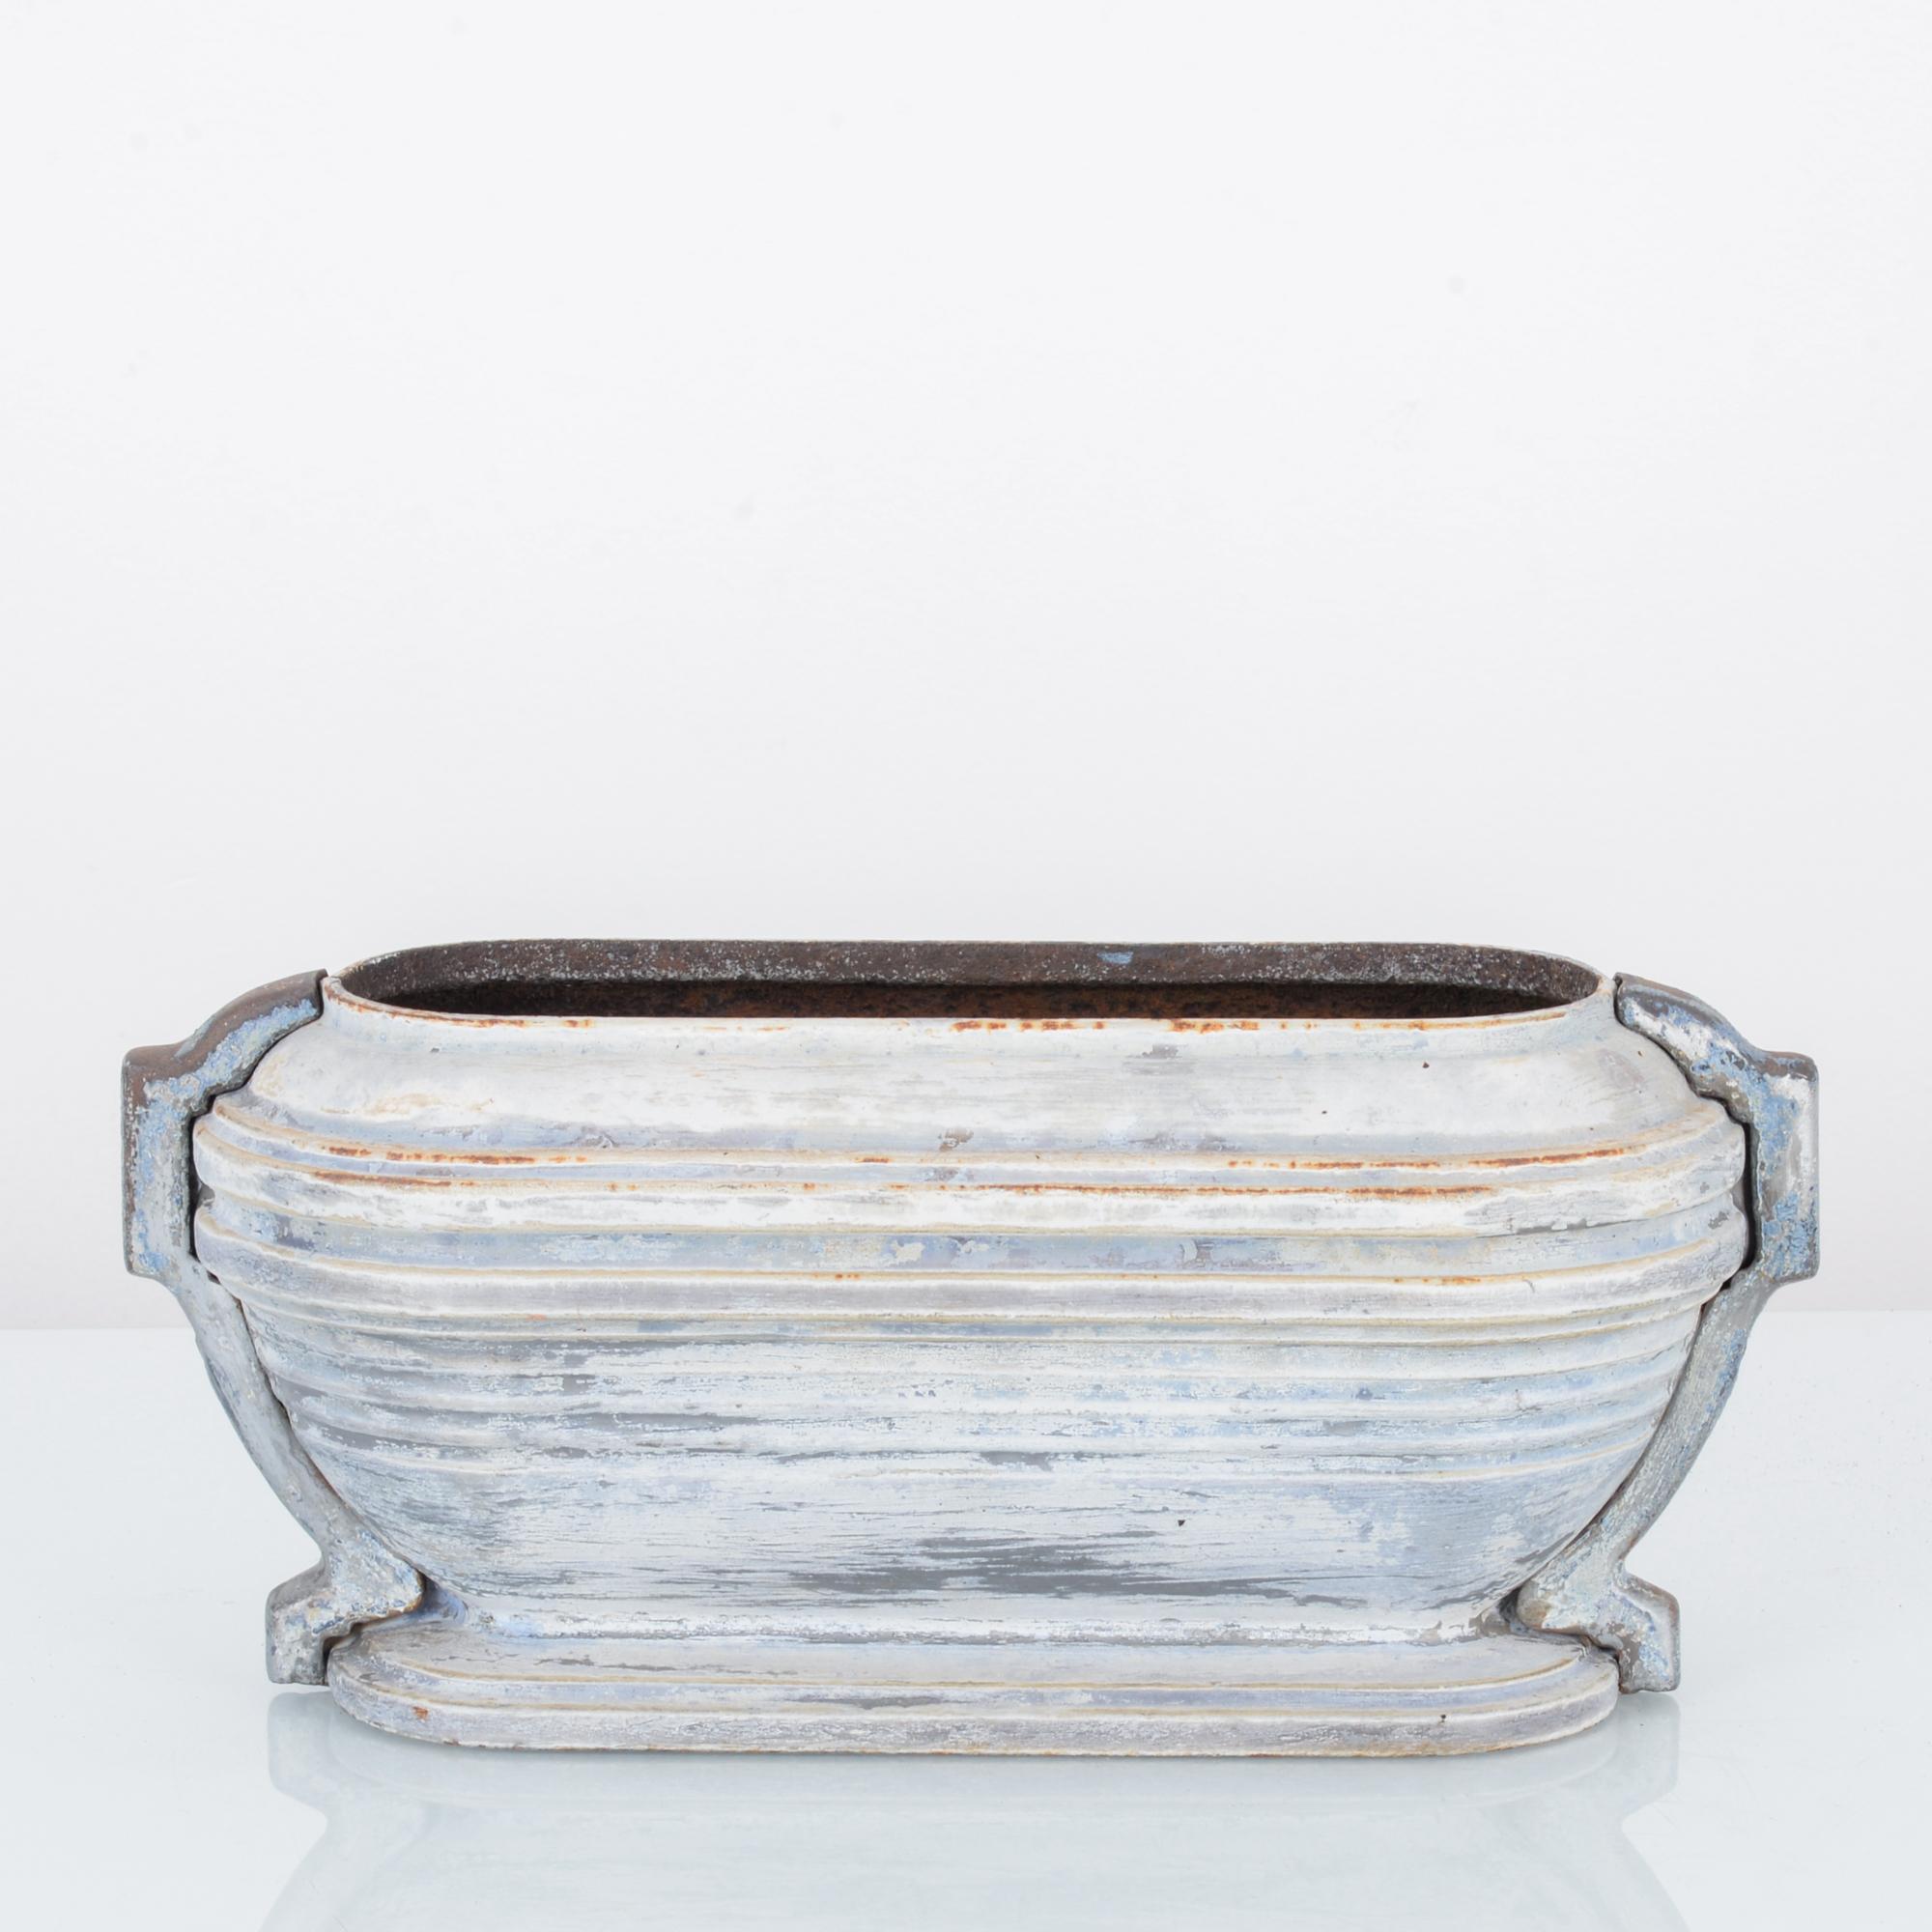 This cast iron planter was made in France, circa 1900. The horizontal details around the body sets off its unique stadium-shaped design. It stands on a stepped base and features holders on the sides. The bluish-white patina imparts a rustic quality